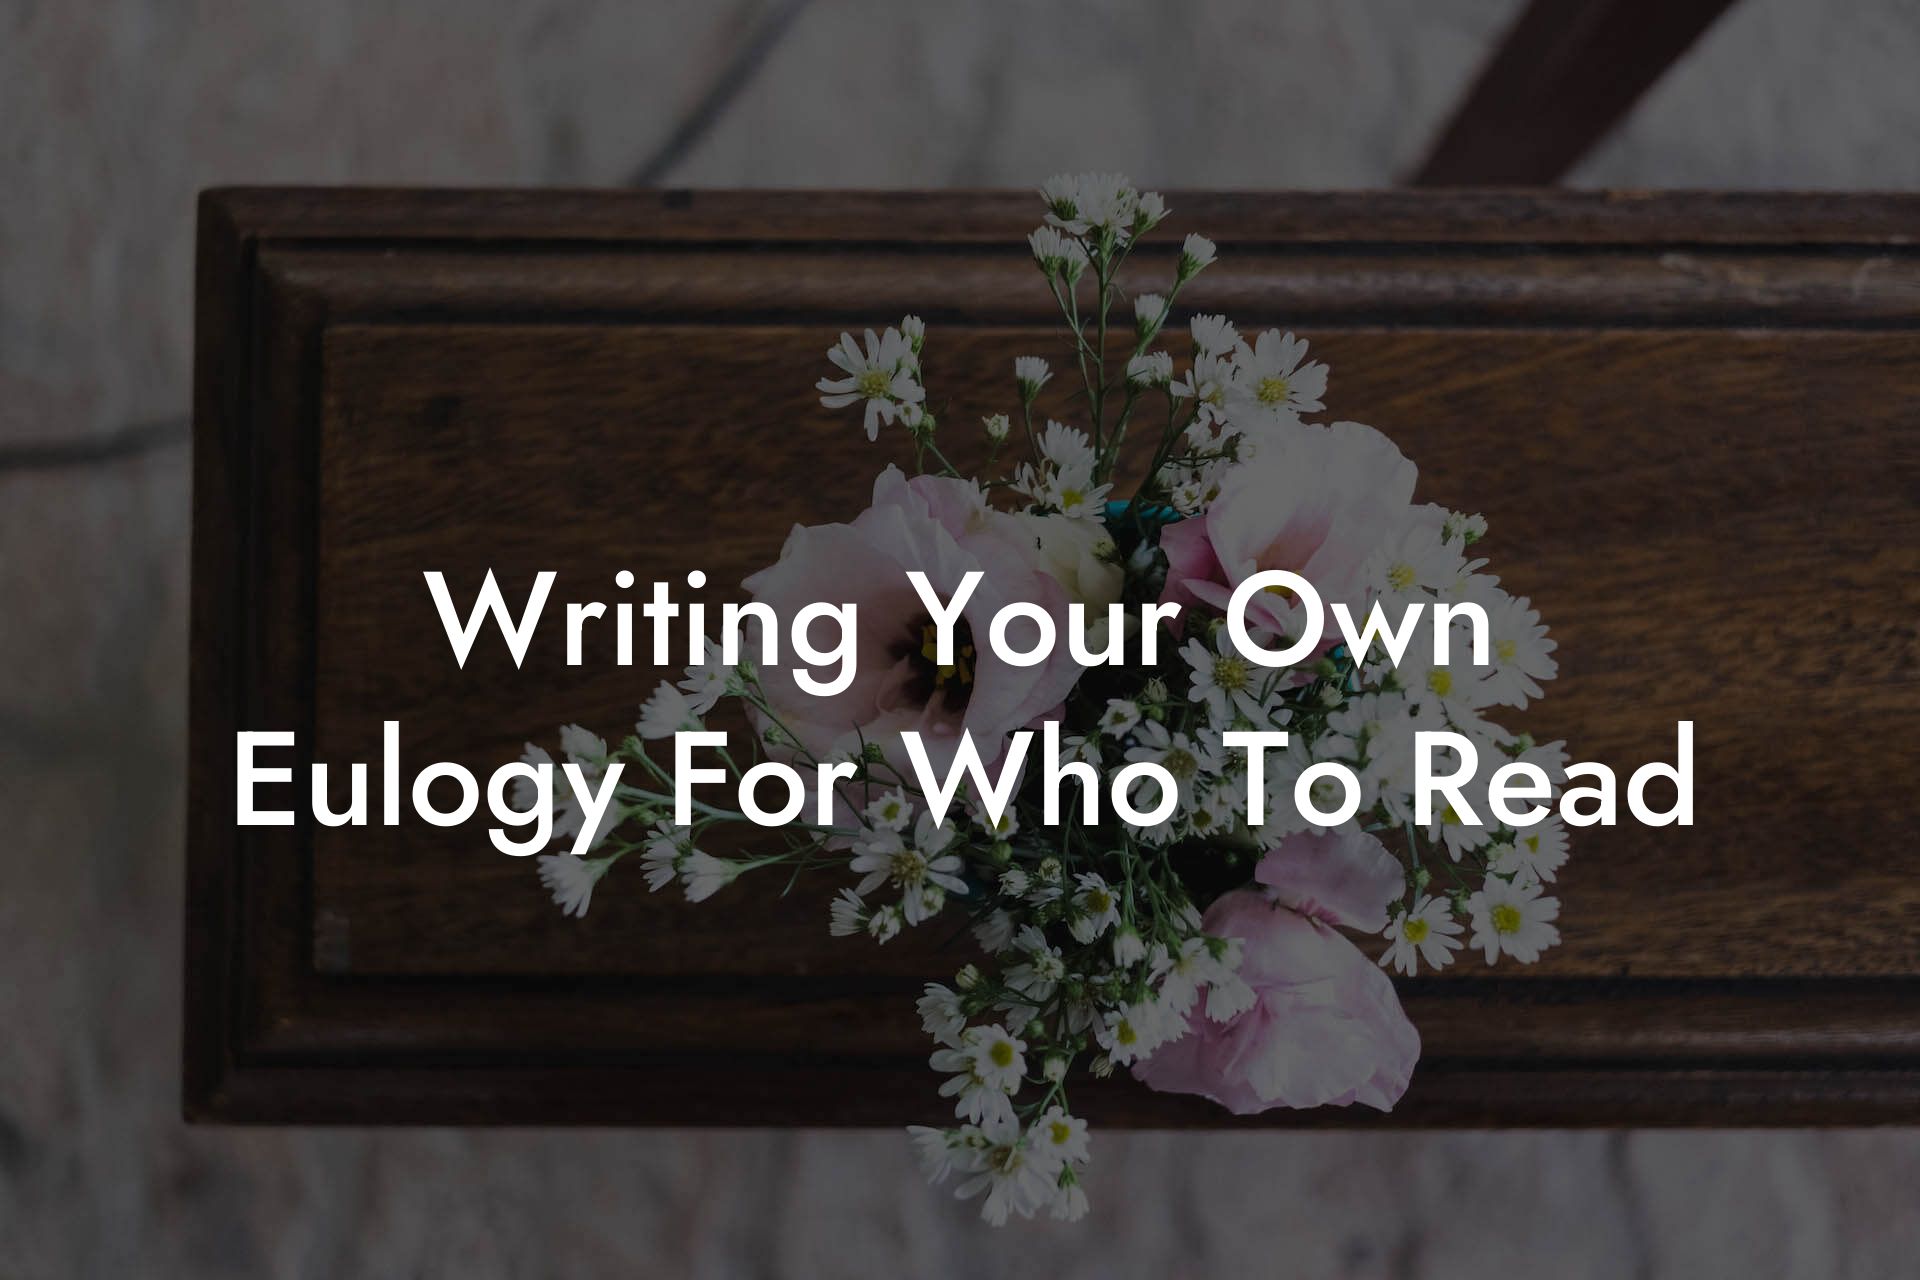 Writing Your Own Eulogy For Who To Read